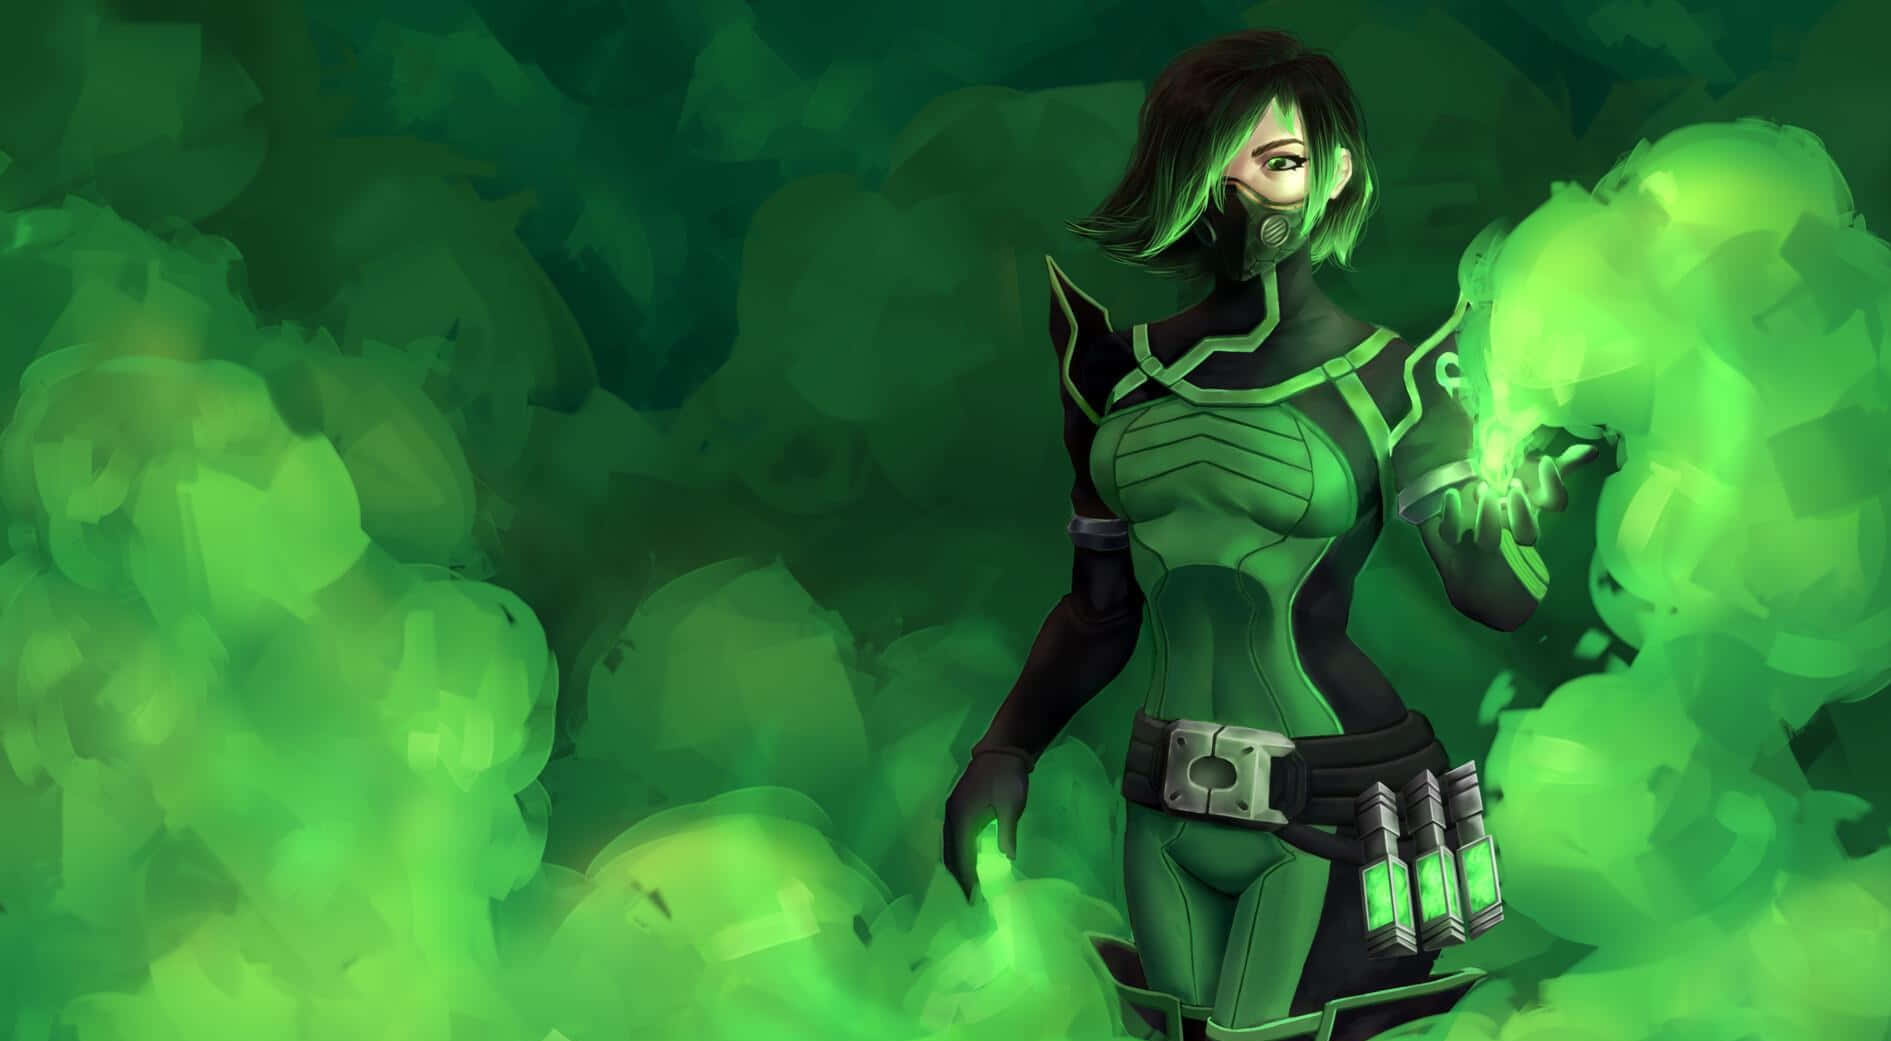 A Green Female Character Standing In Front Of Green Smoke